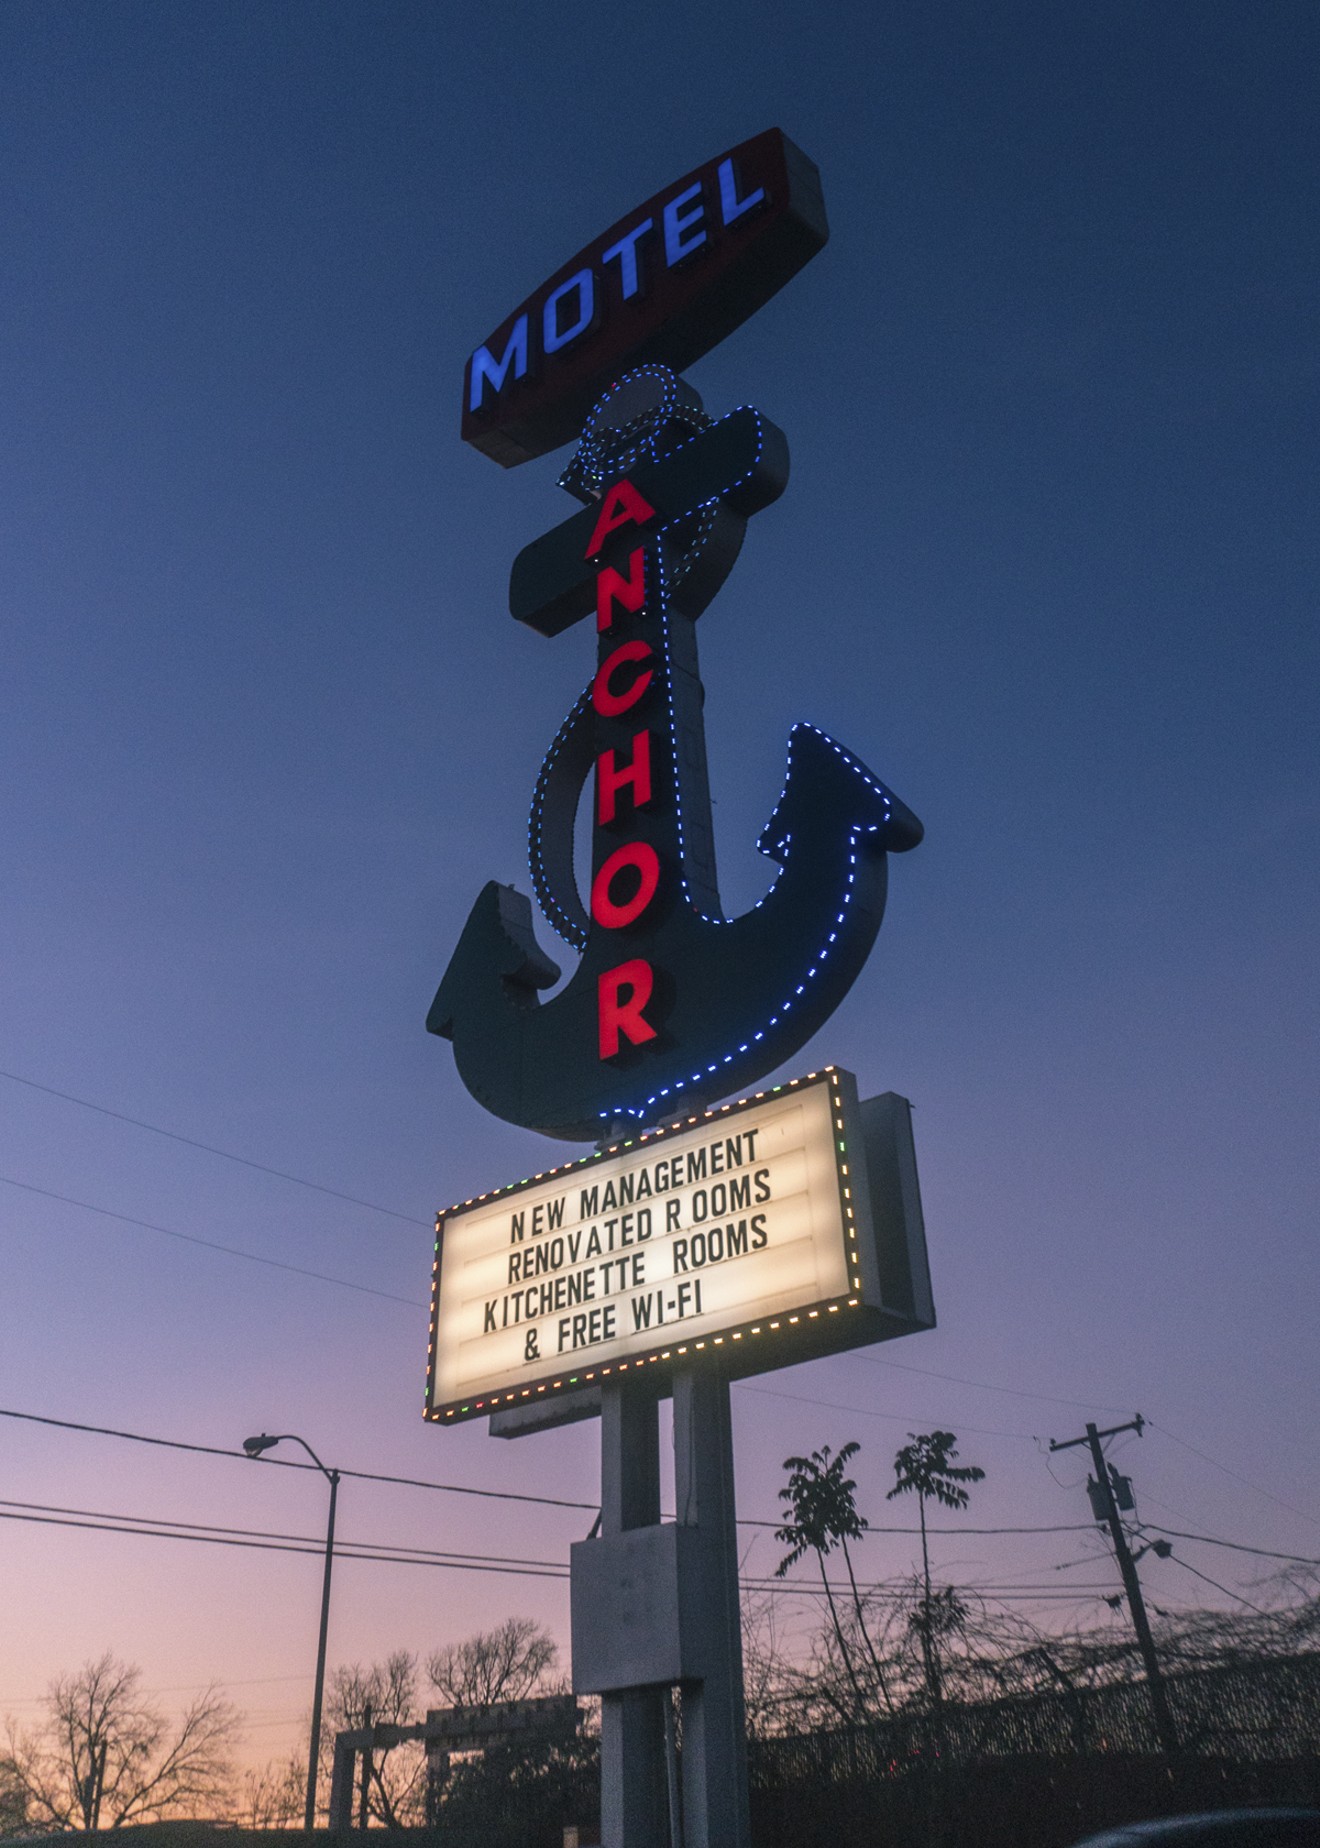 The lighted sign at the Anchor Motel